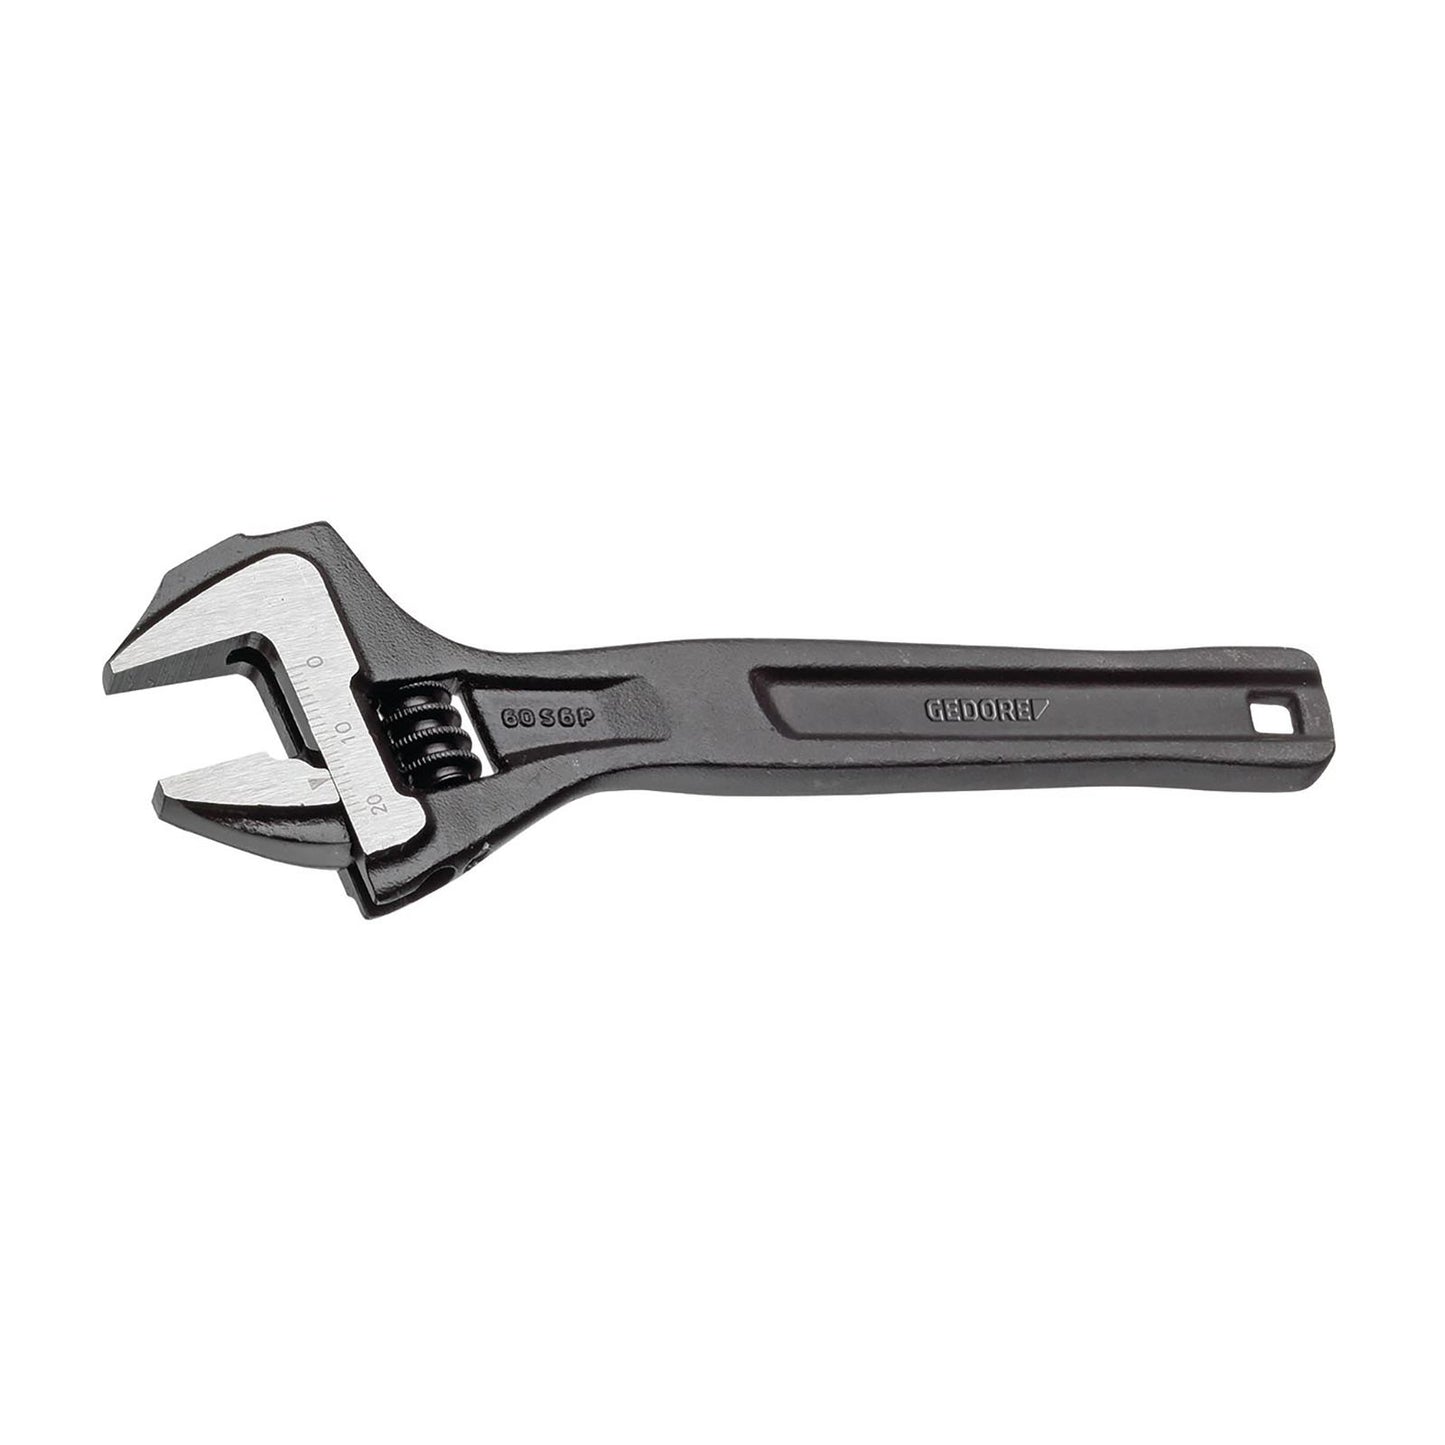 GEDORE 60 S 6 P - Phosphated Adjustable Wrench, 6" (2668815)